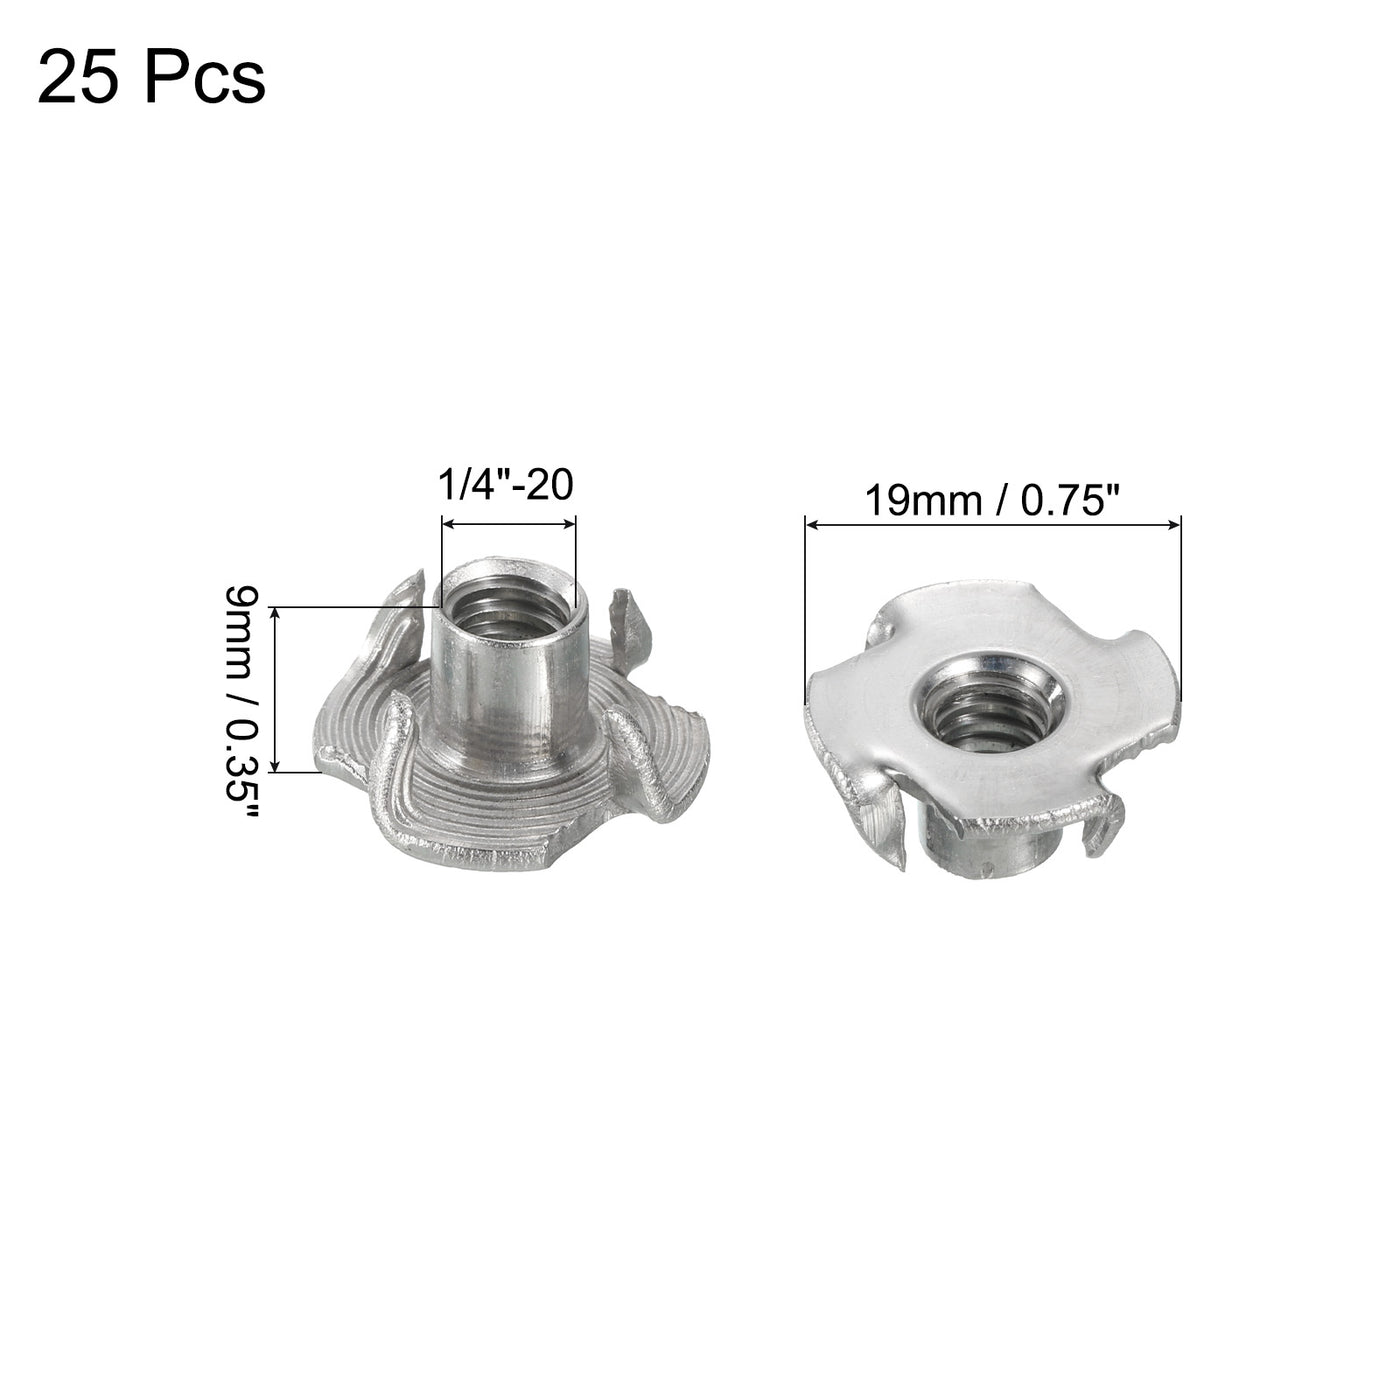 uxcell Uxcell 1/4"-20 T-nut 25pcs 304 Stainless Steel 4 Pronged Tee Nuts Threaded Insertion